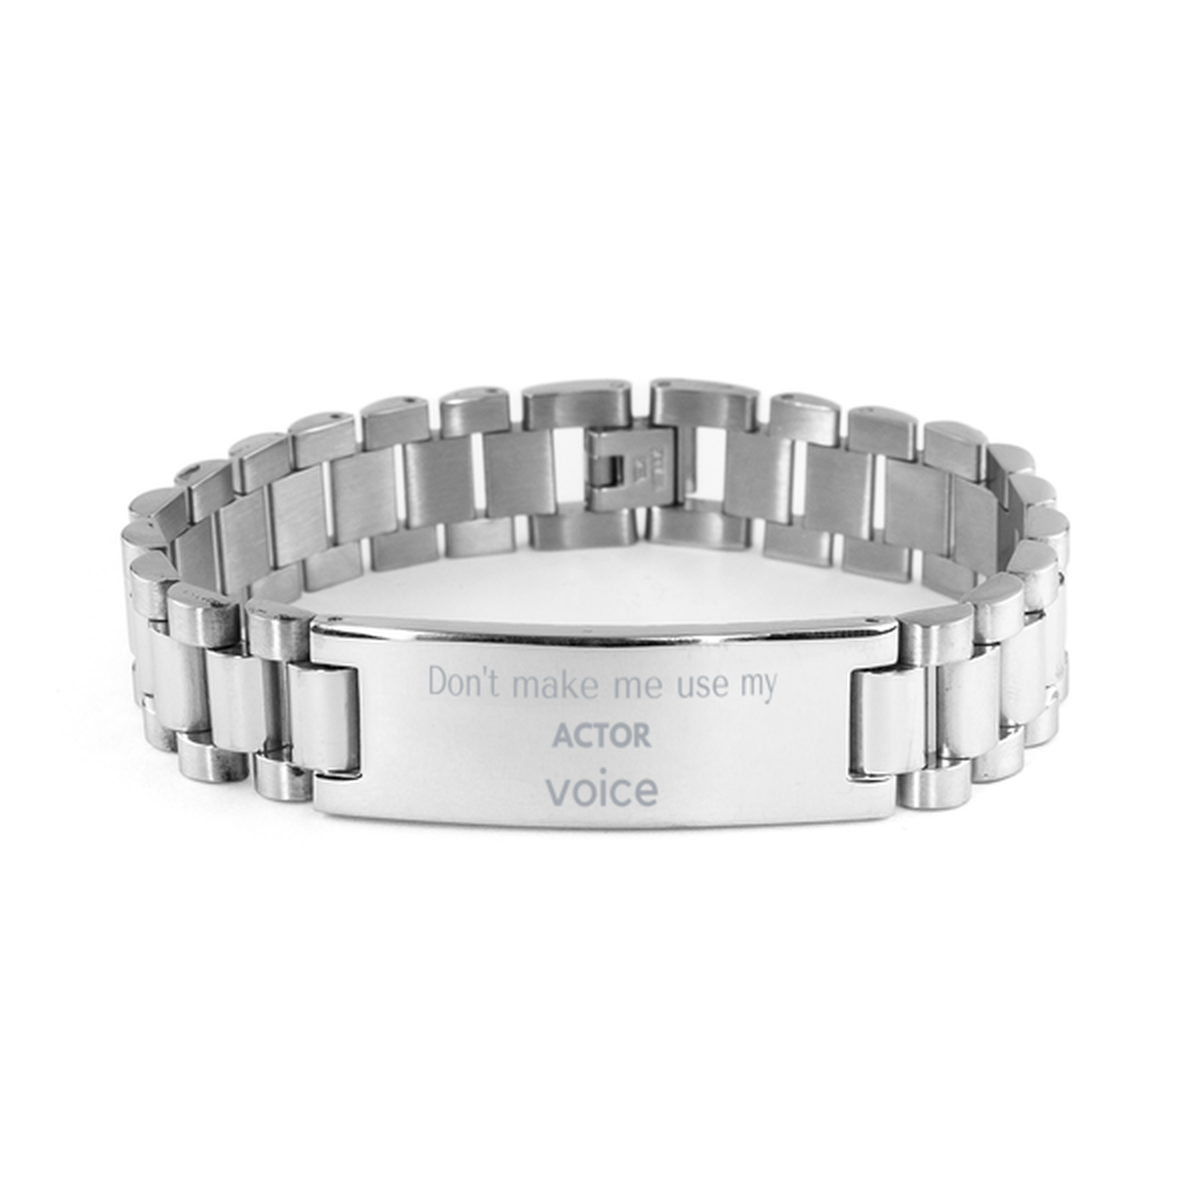 Don't make me use my Actor voice, Sarcasm Actor Gifts, Christmas Actor Ladder Stainless Steel Bracelet Birthday Unique Gifts For Actor Coworkers, Men, Women, Colleague, Friends